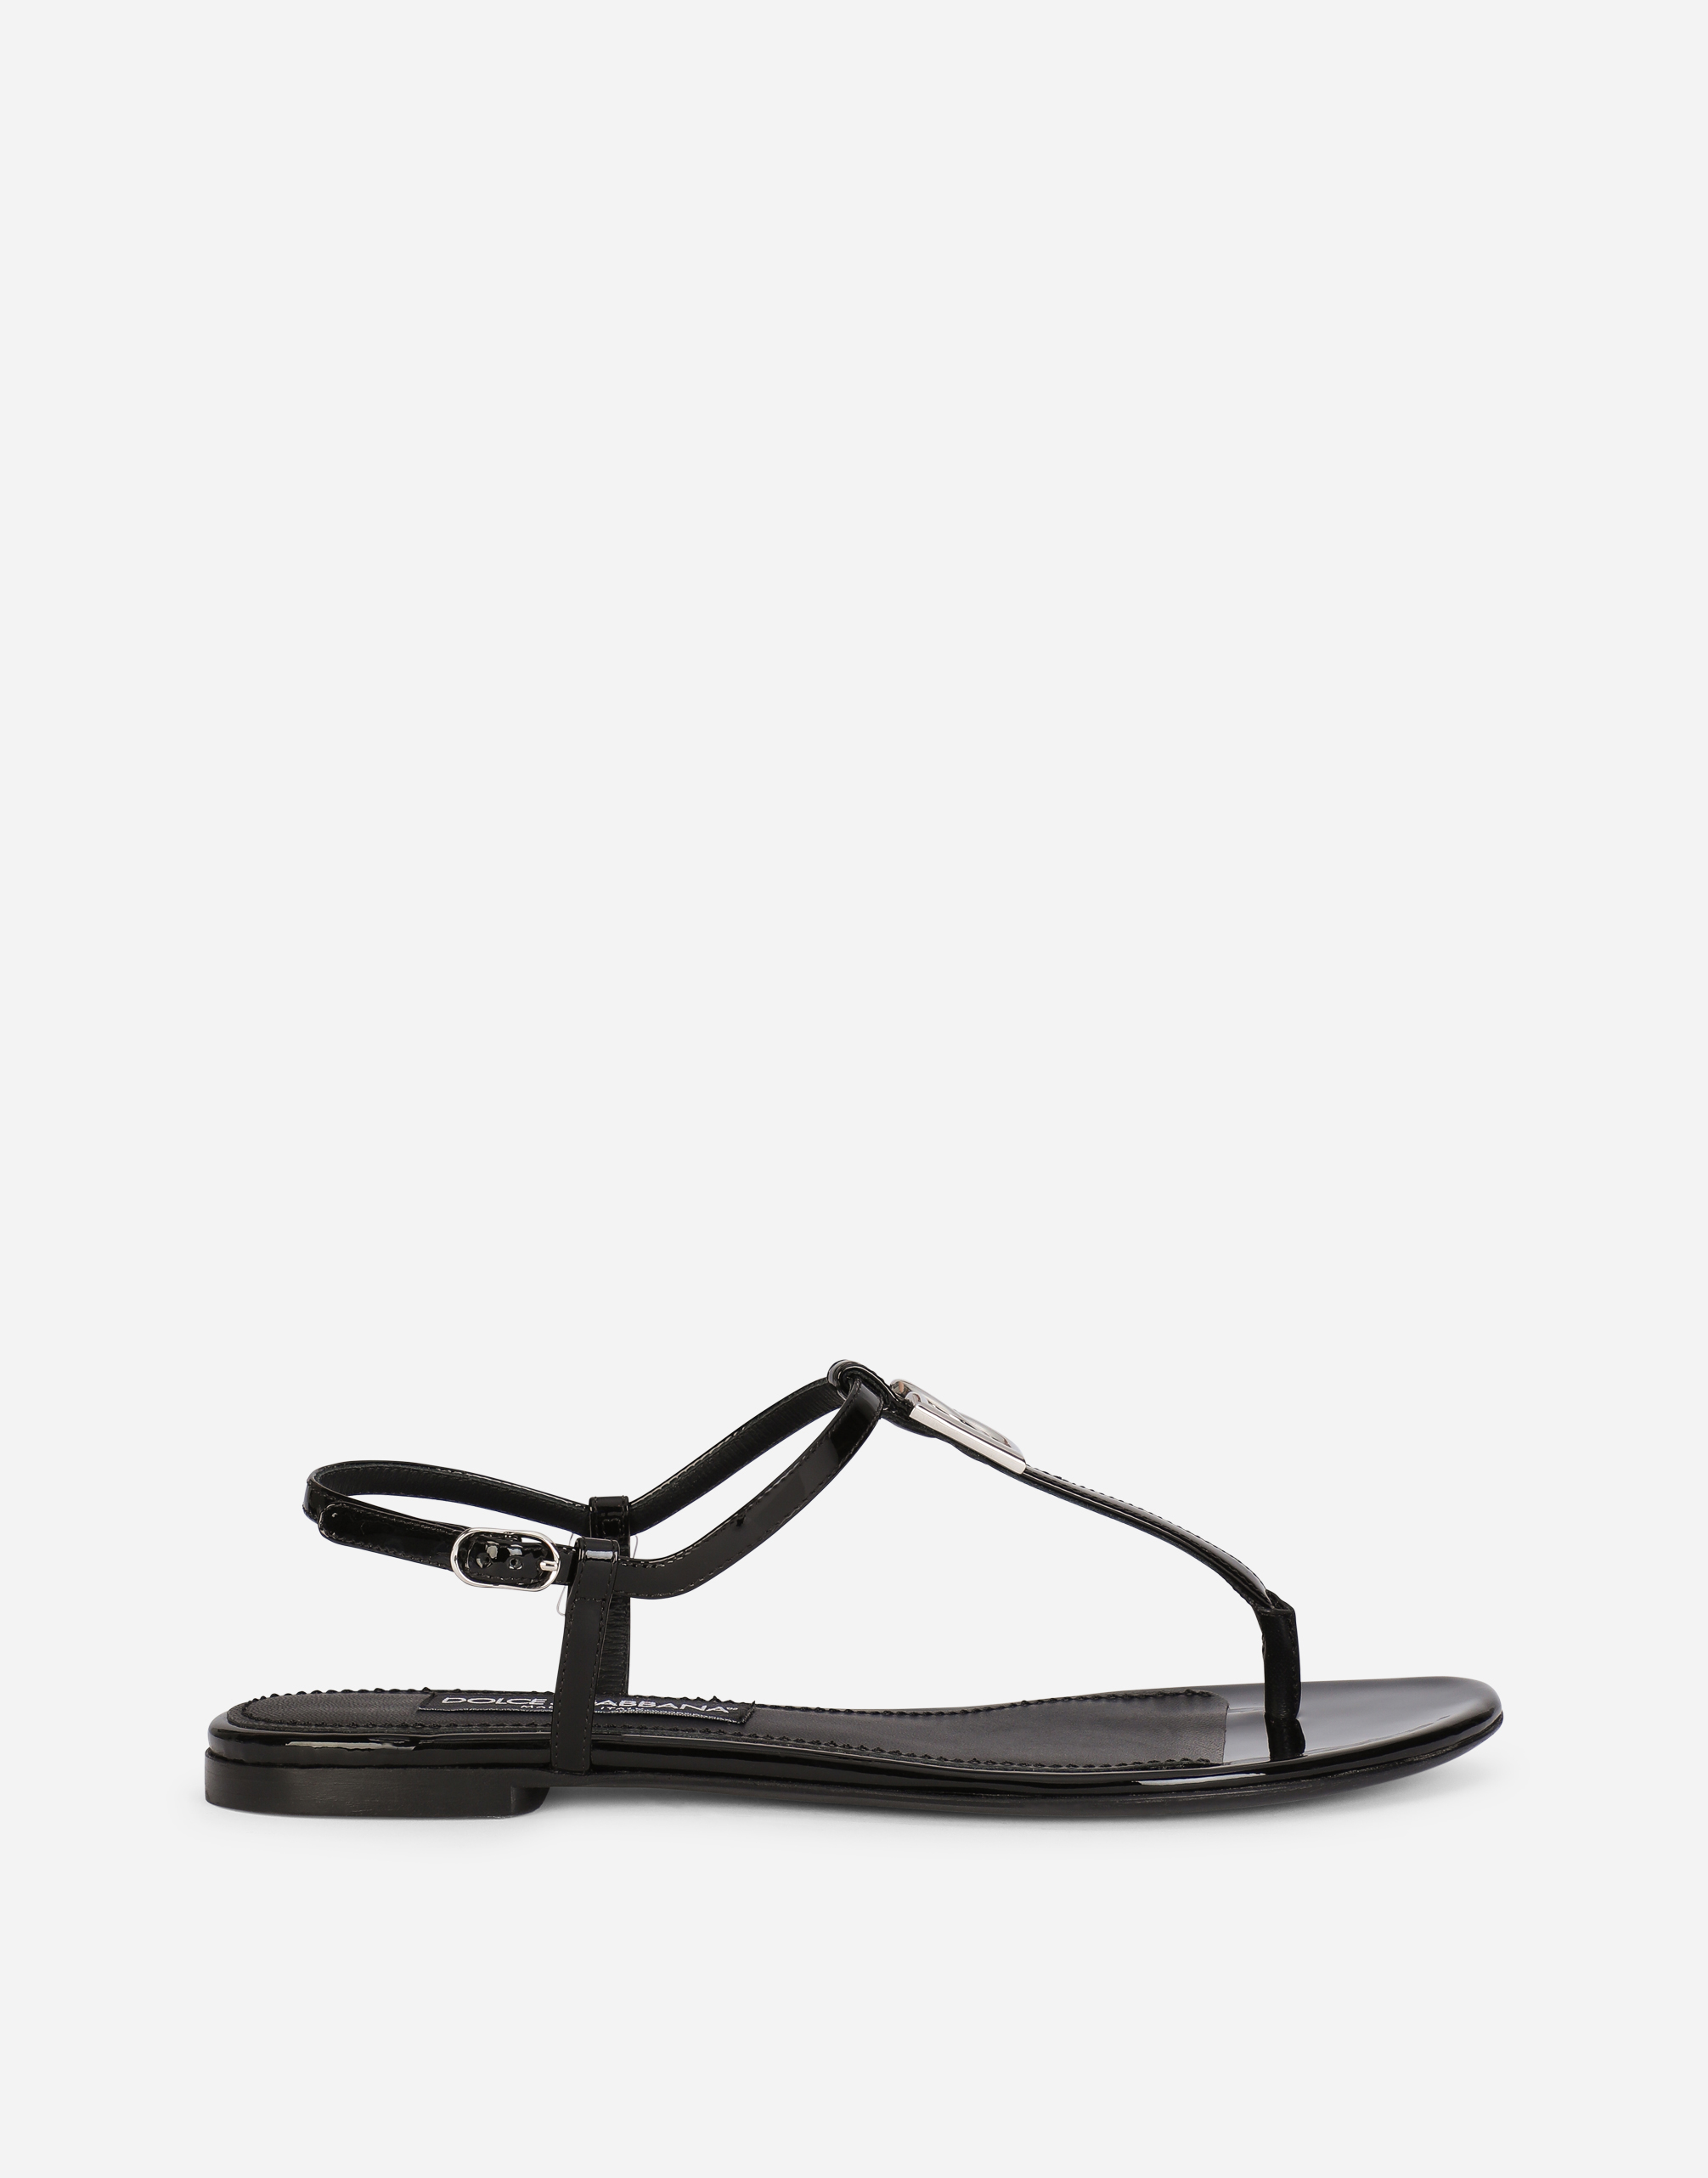 Patent leather DG thong sandals in Black